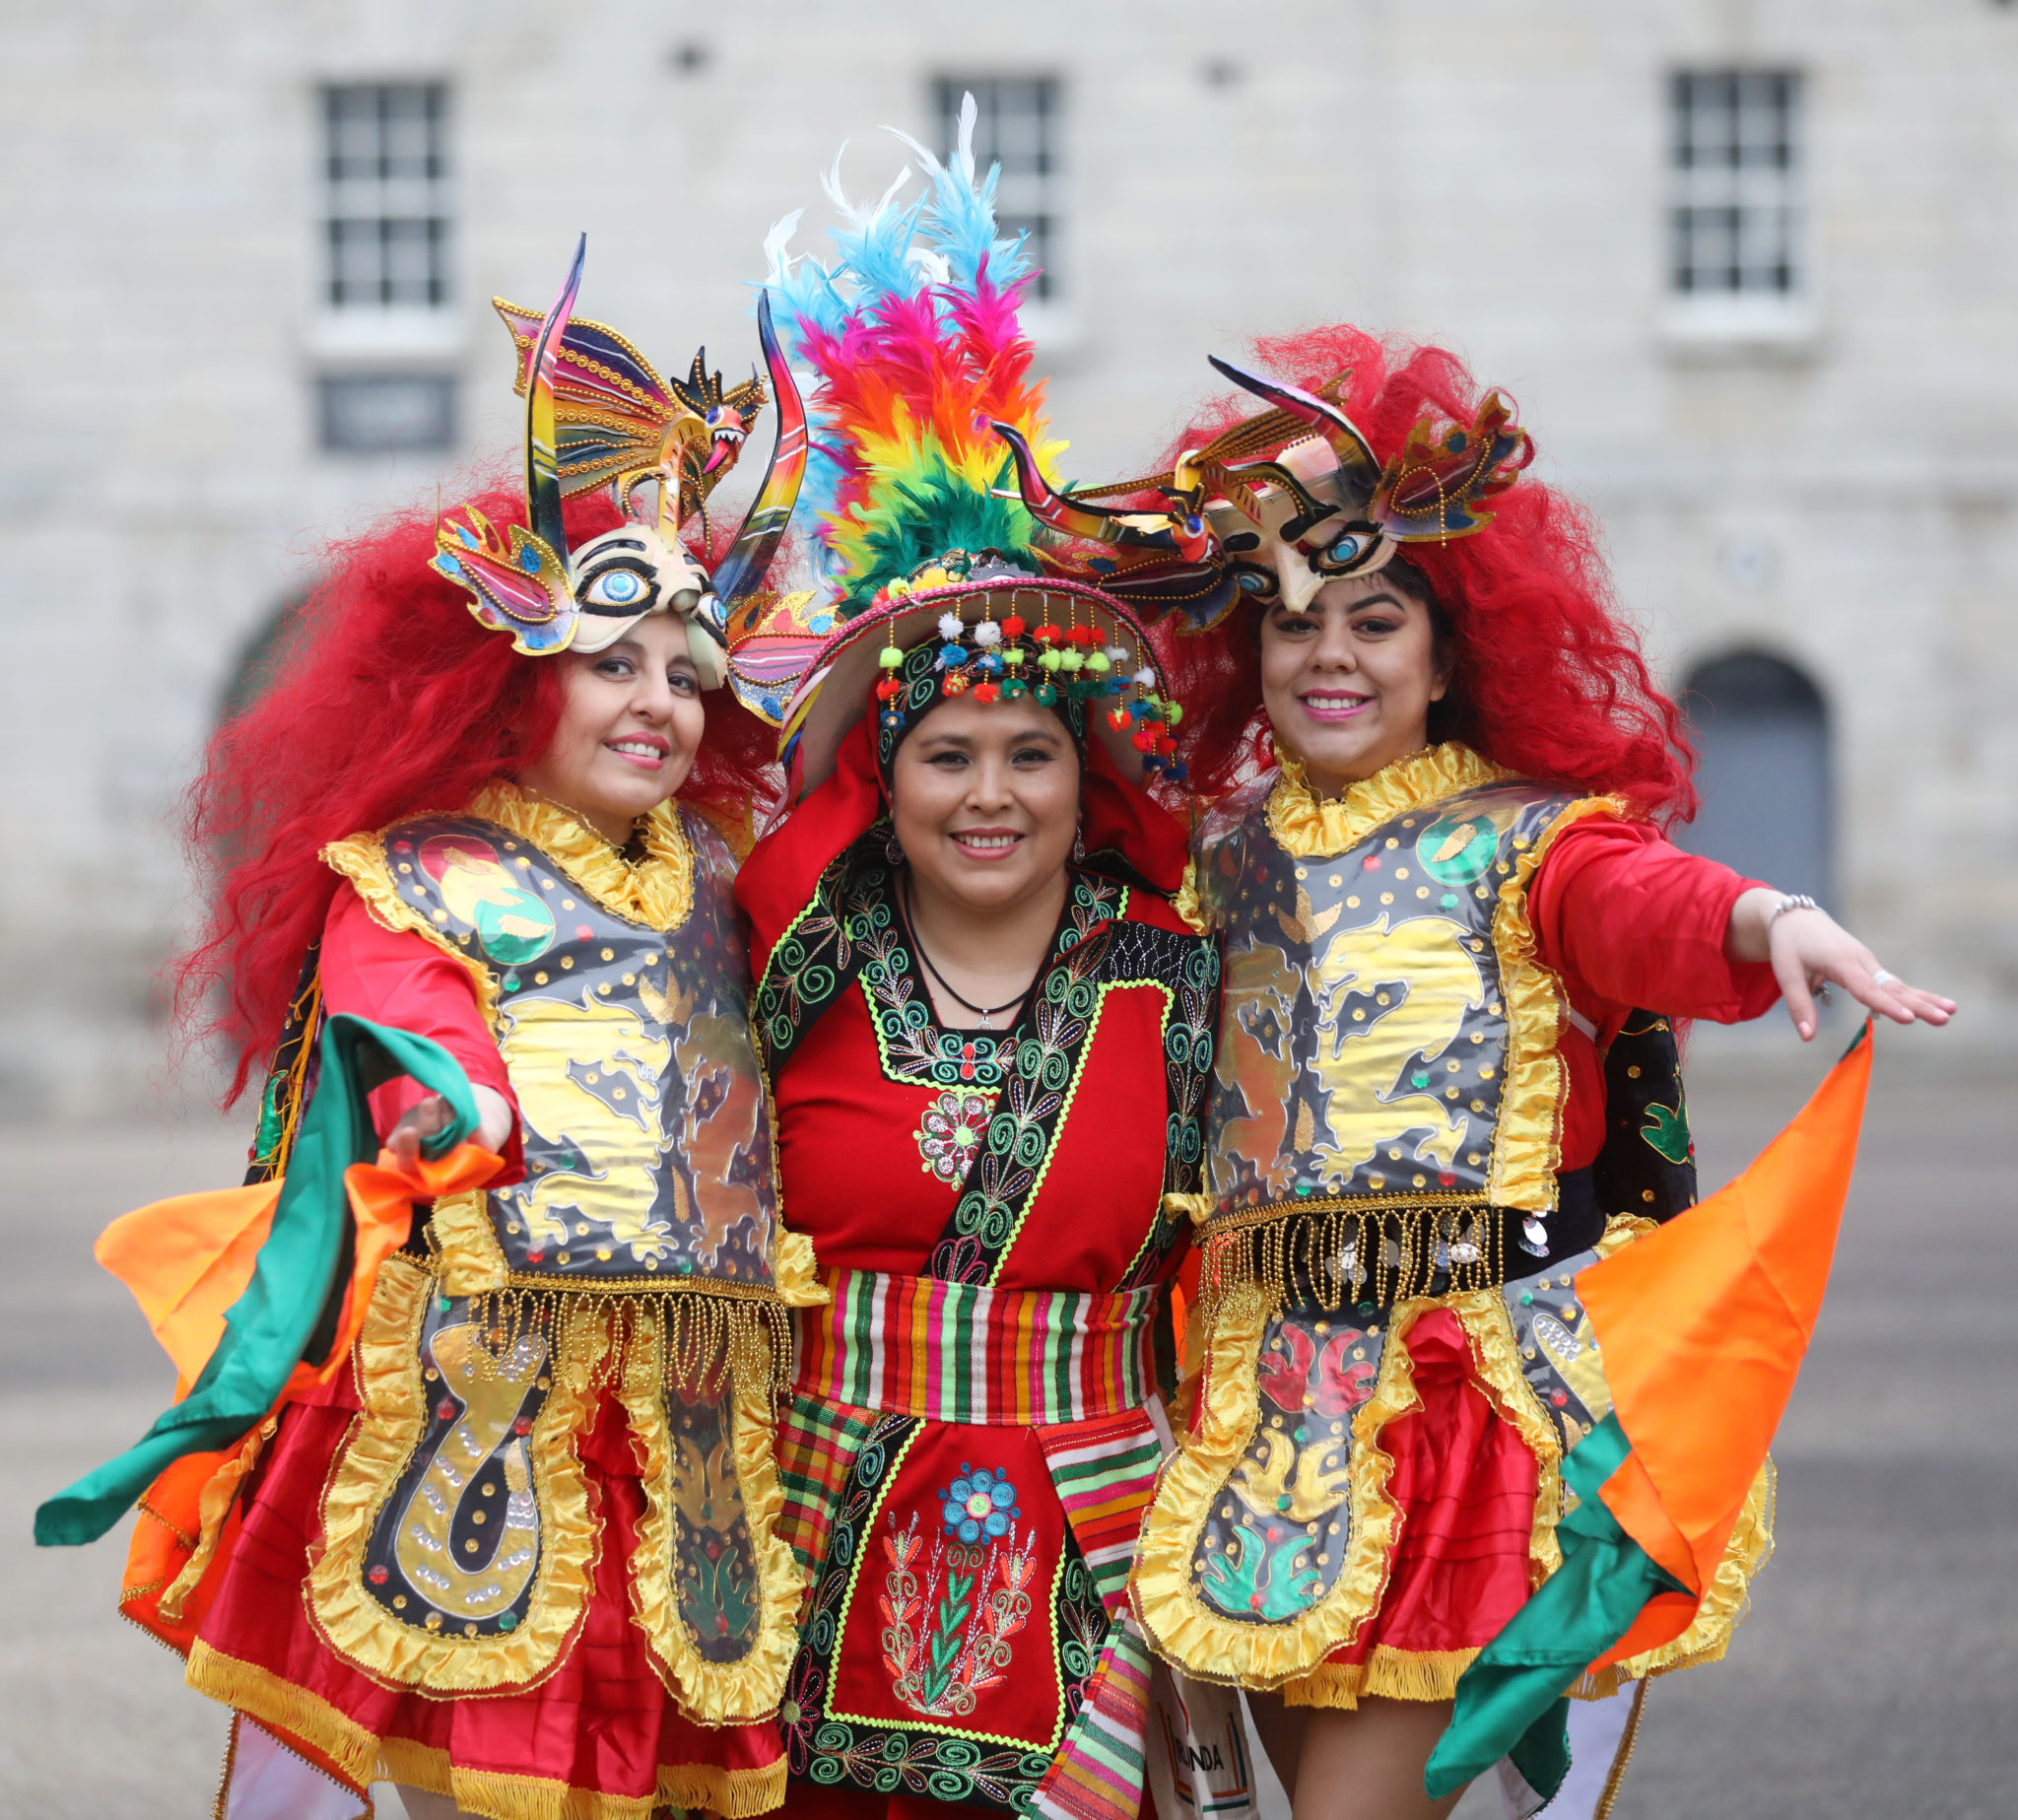 At the launch of the 2022 St Patrick's Festival (left to right): Diana, Silvia and Jamirka from Alam Boliviana dance group at Collins Barracks in Dublin. 